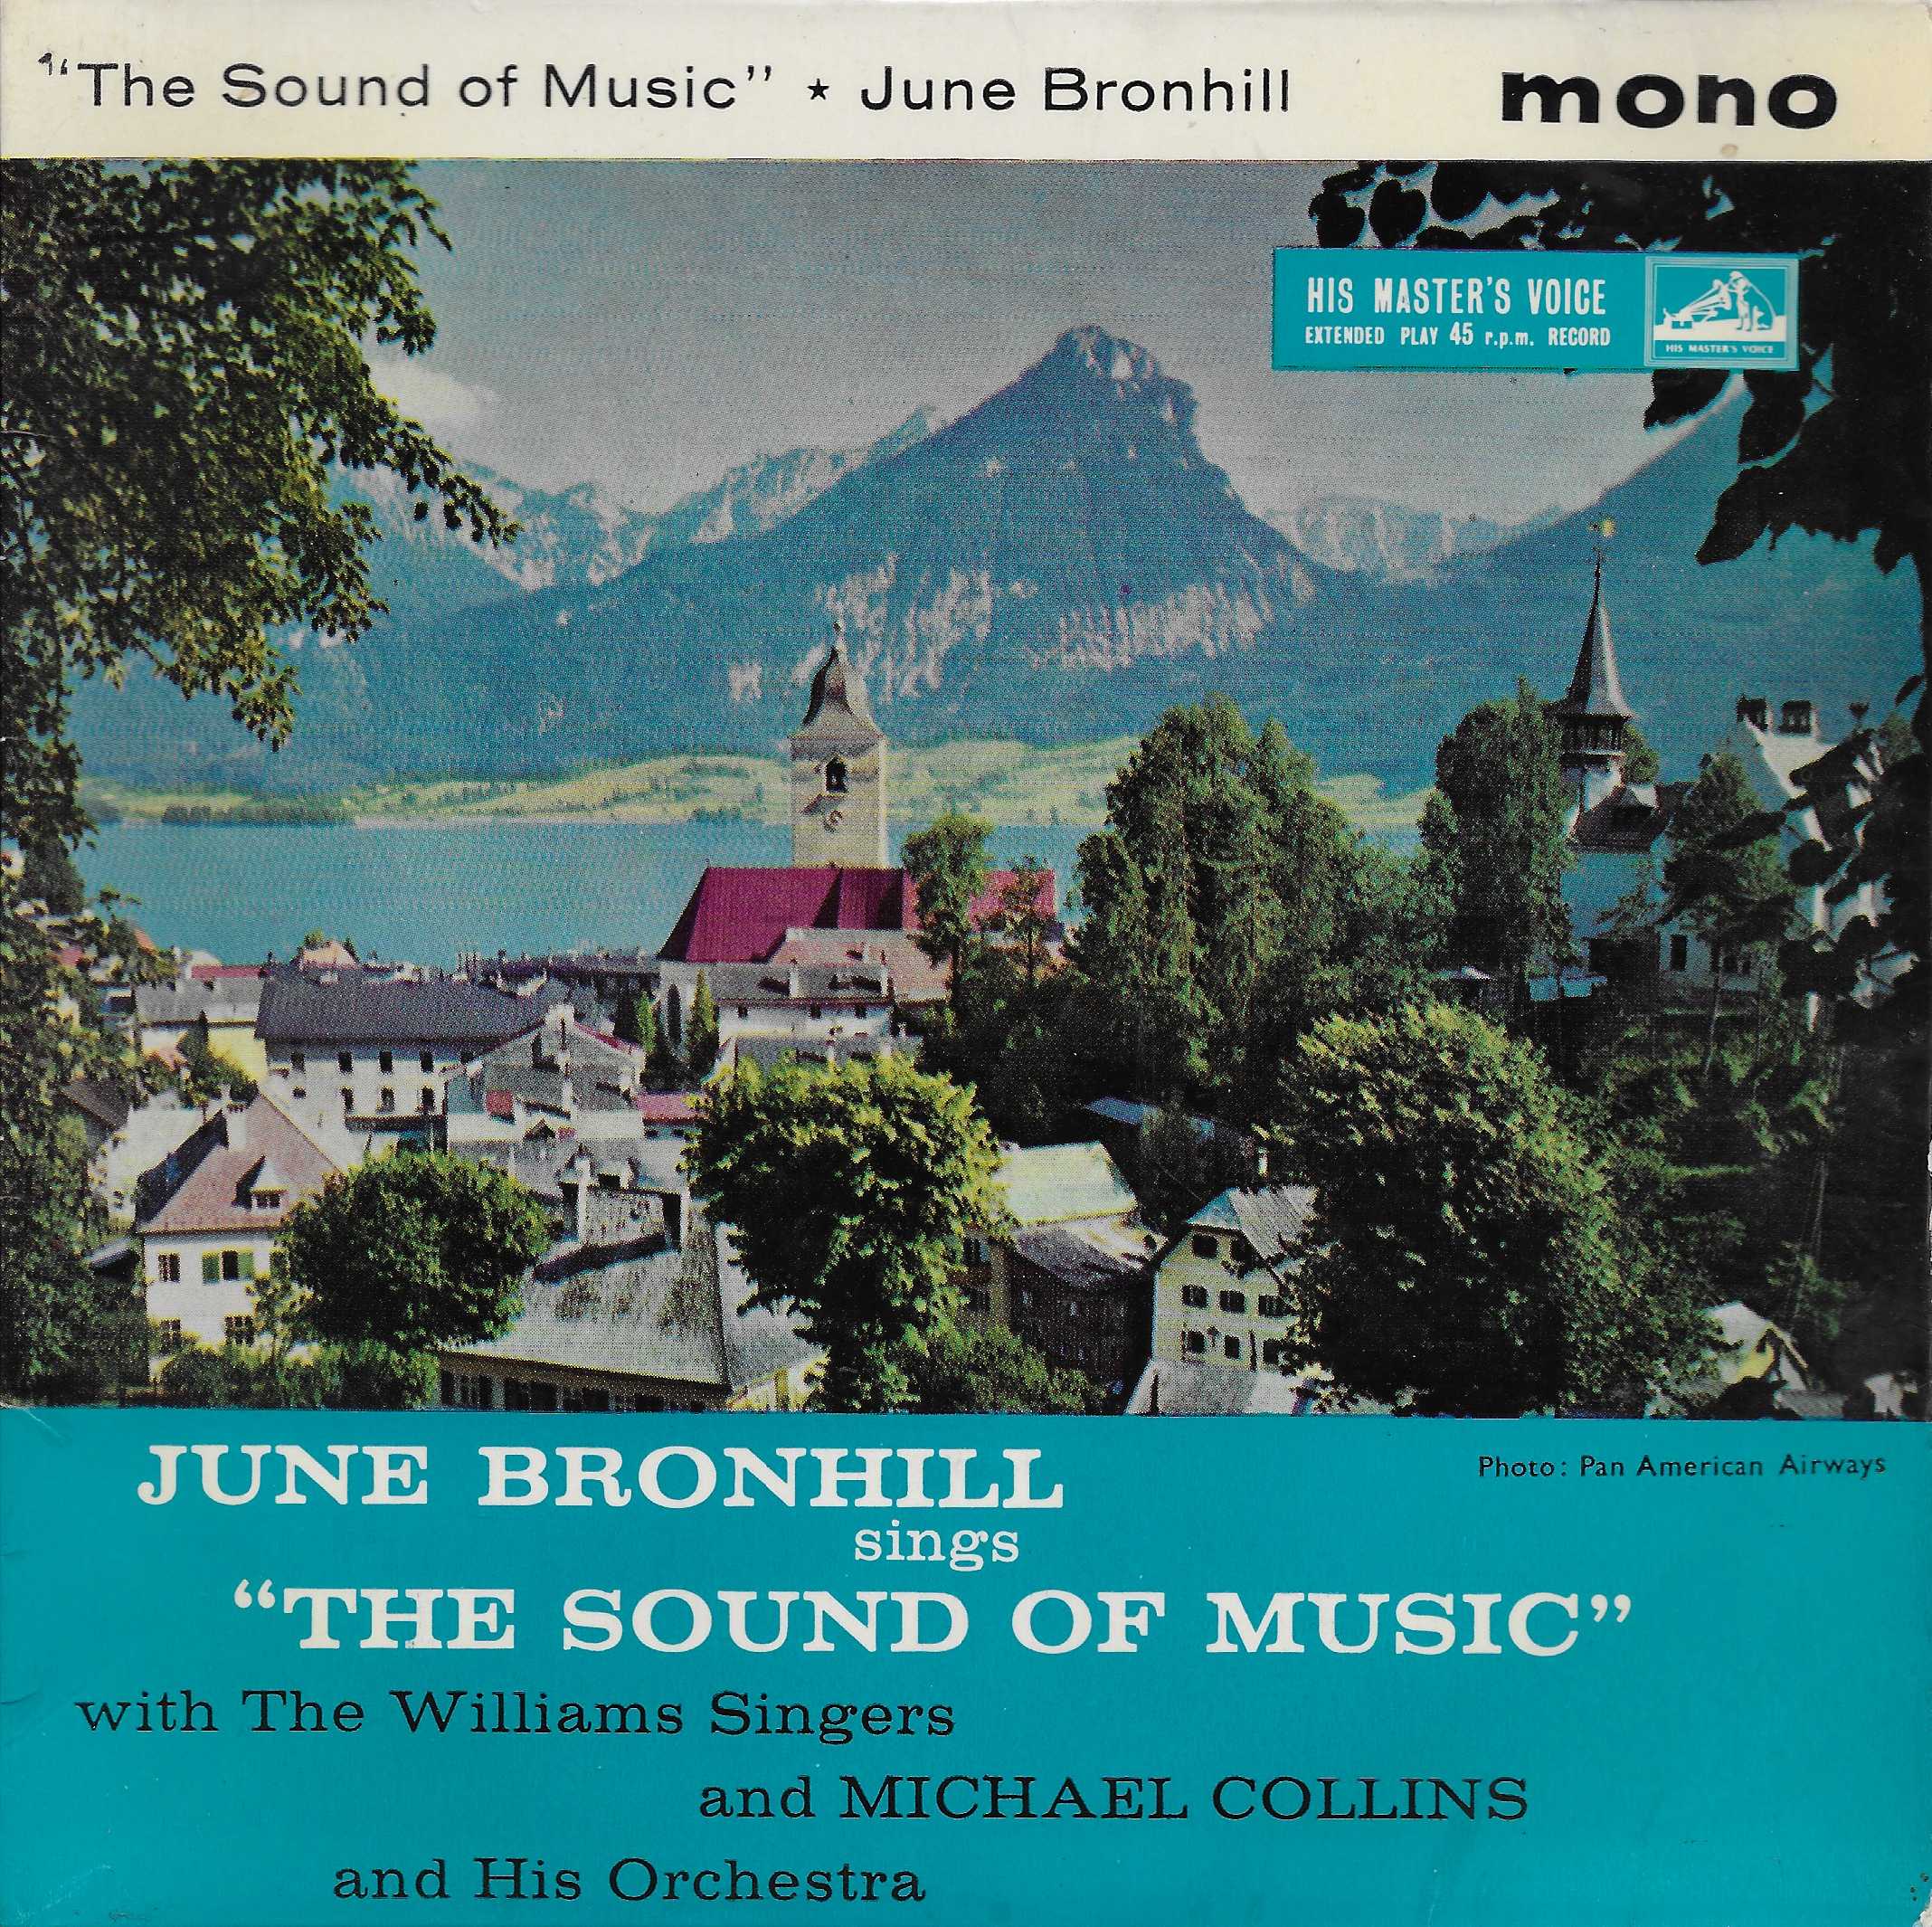 Picture of 7EG 8695 The sound of music by artist Rogers / Hammerstein II / June Bronhill with the Williams Singers and Michael Collins and his orchestra from ITV, Channel 4 and Channel 5 singles library